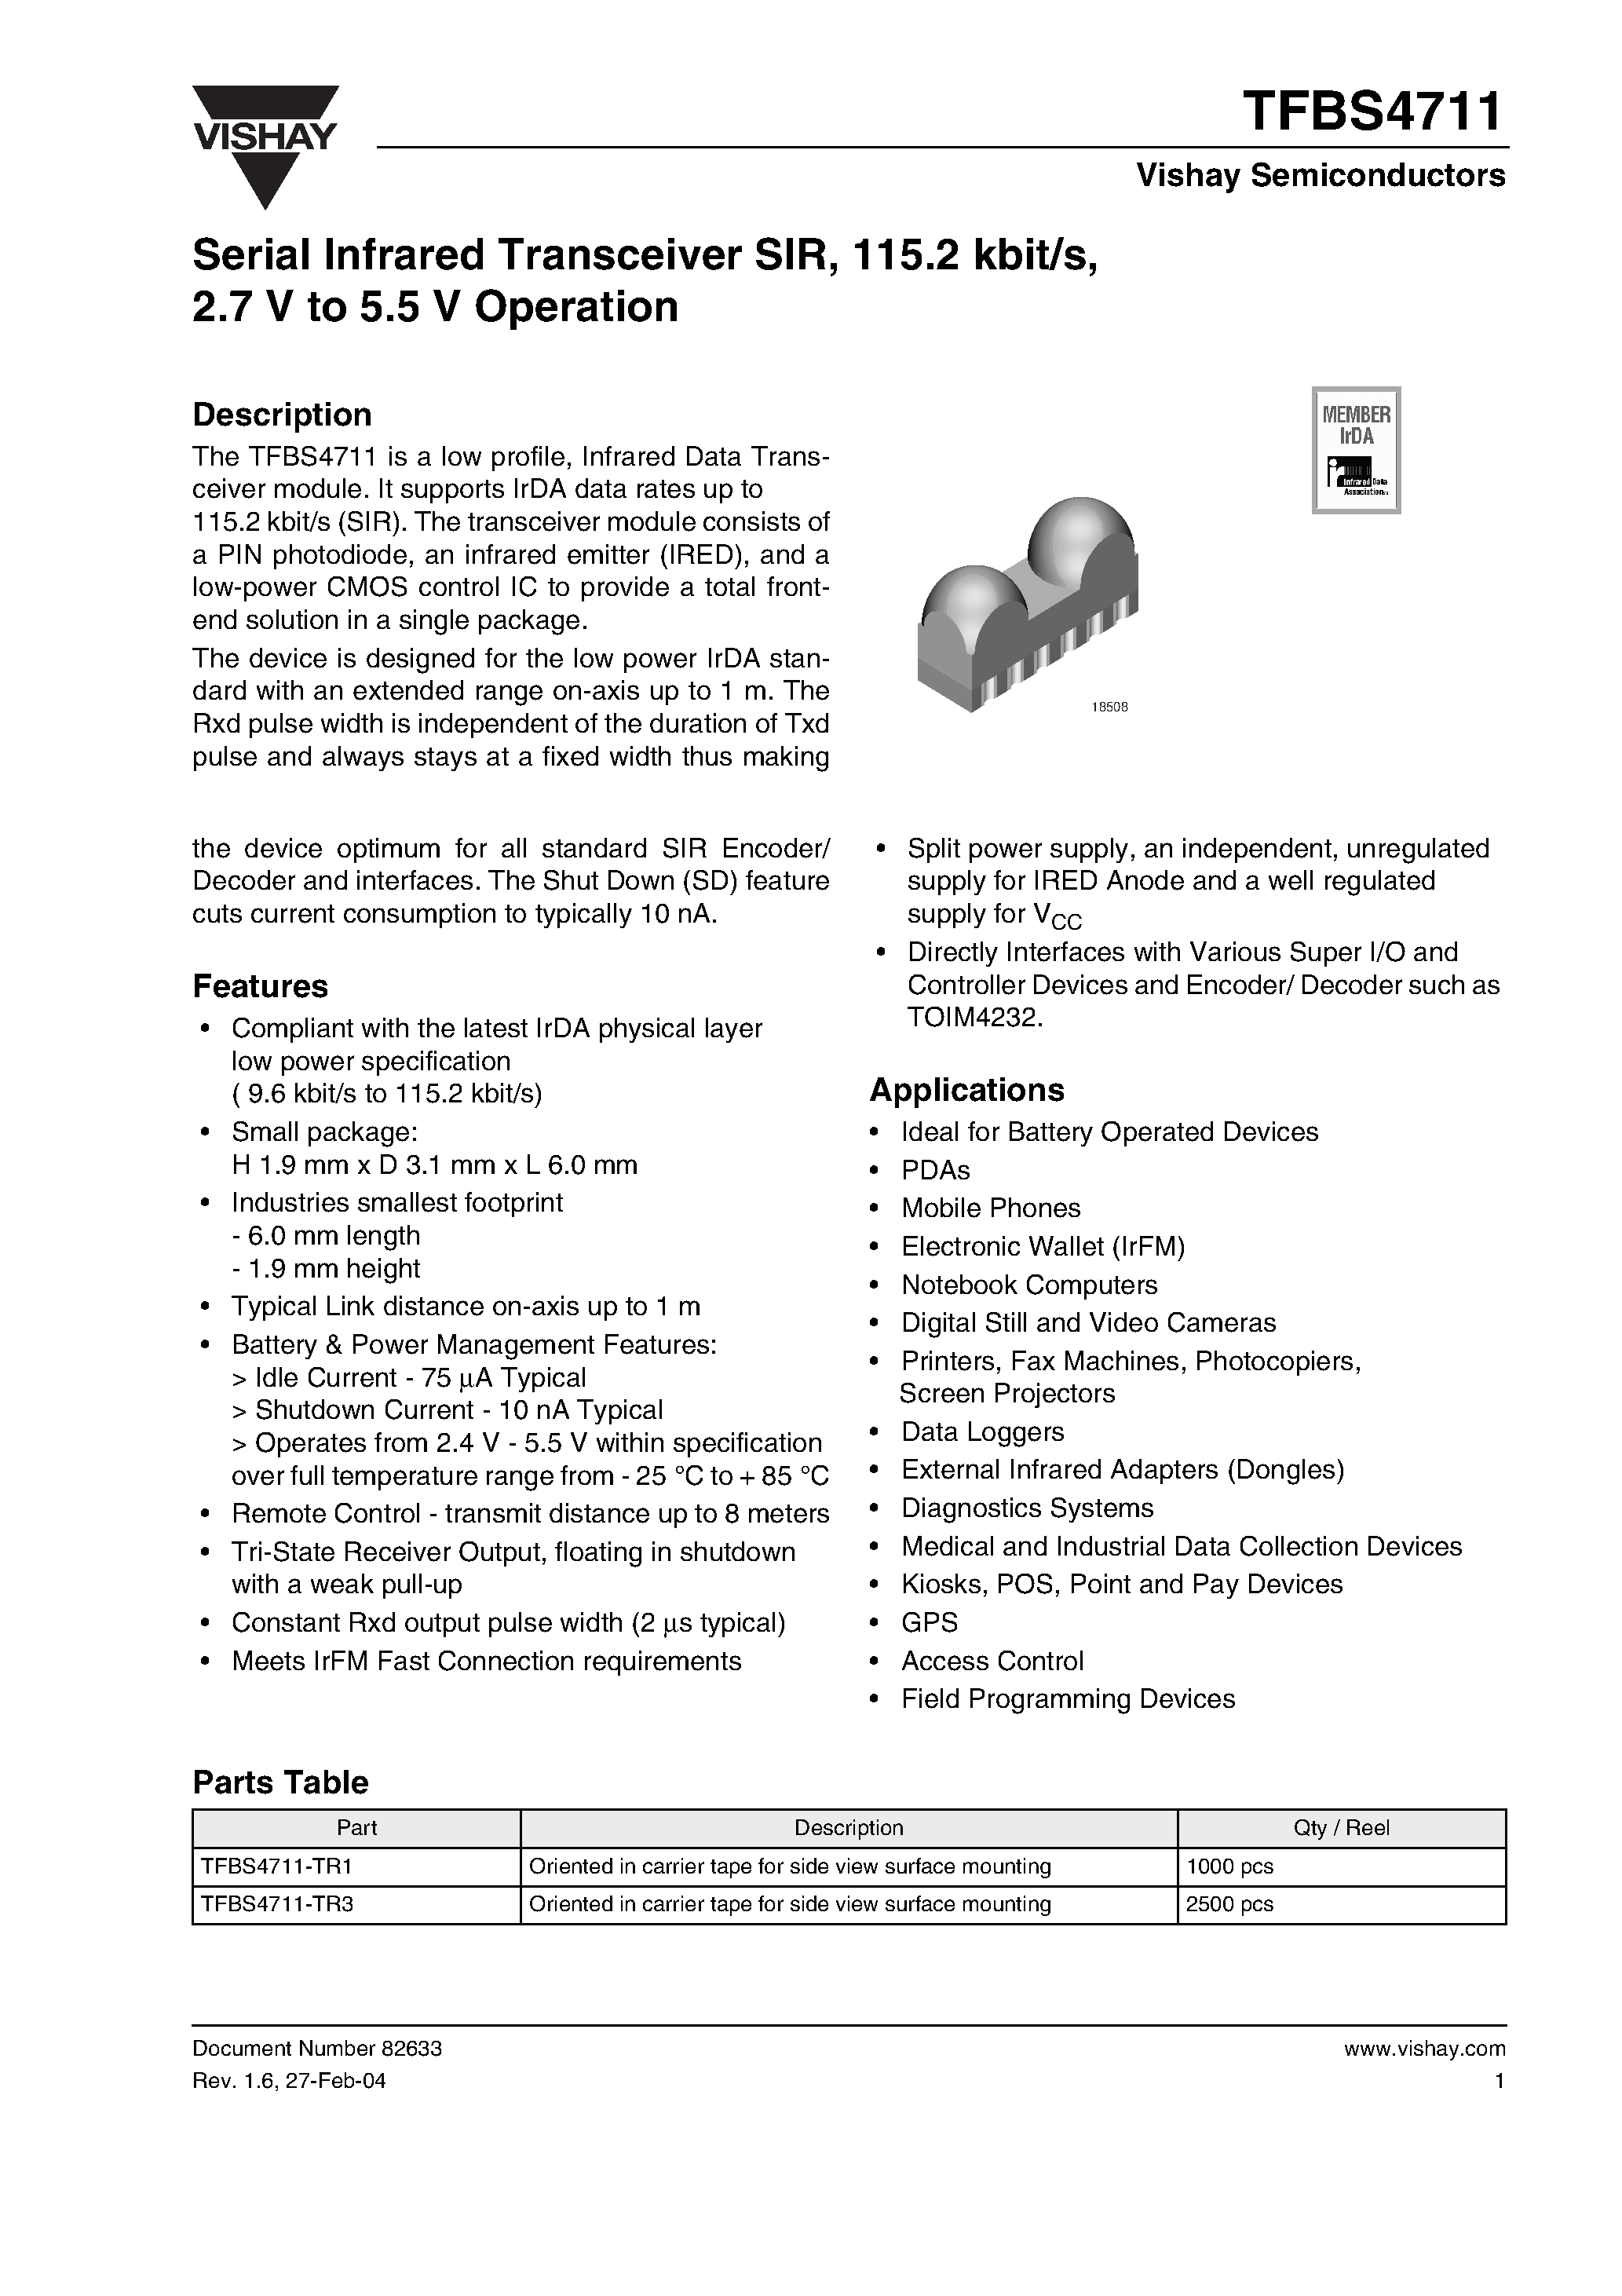 Datasheet TFBS4711-TR3 - Serial Infrared Transceiver SIR/ 115.2 kbit/s/ 2.7 V to 5.5 V Operation page 1